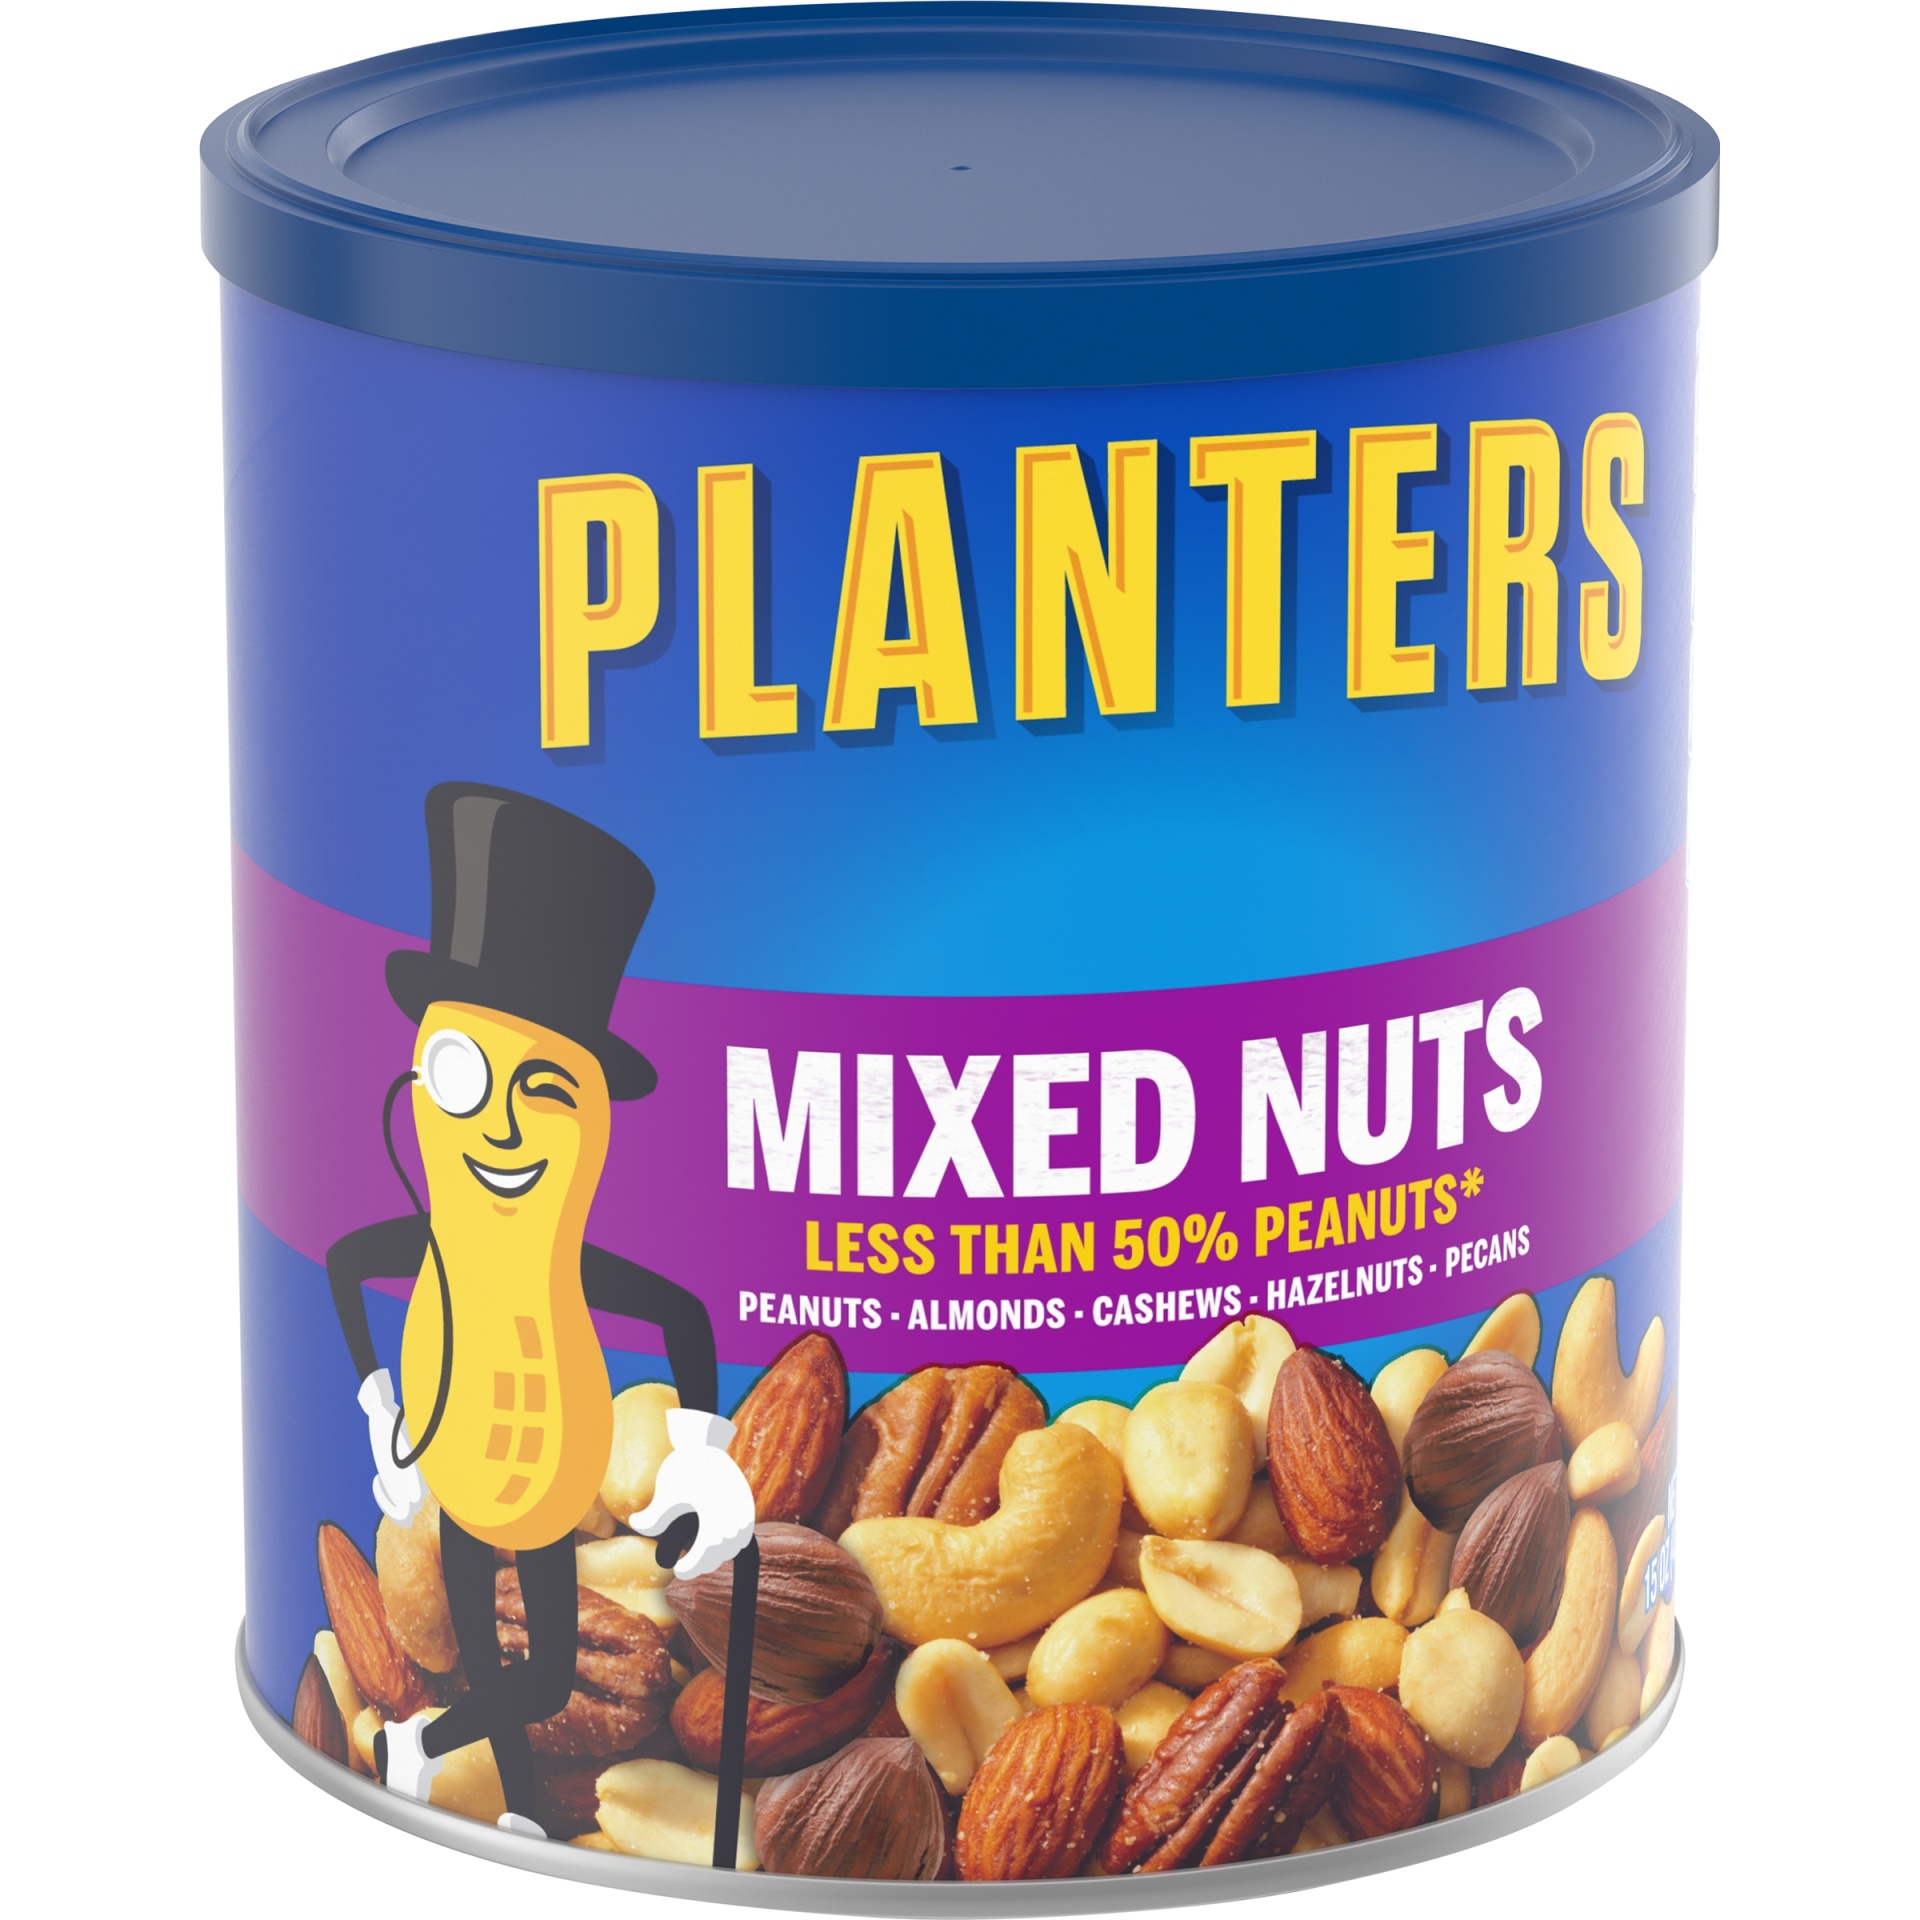 slide 10 of 14, Planters Mixed Nuts Less Than 50% Peanuts with Peanuts, Almonds, Cashews, Hazelnuts & Pecans, 15 oz